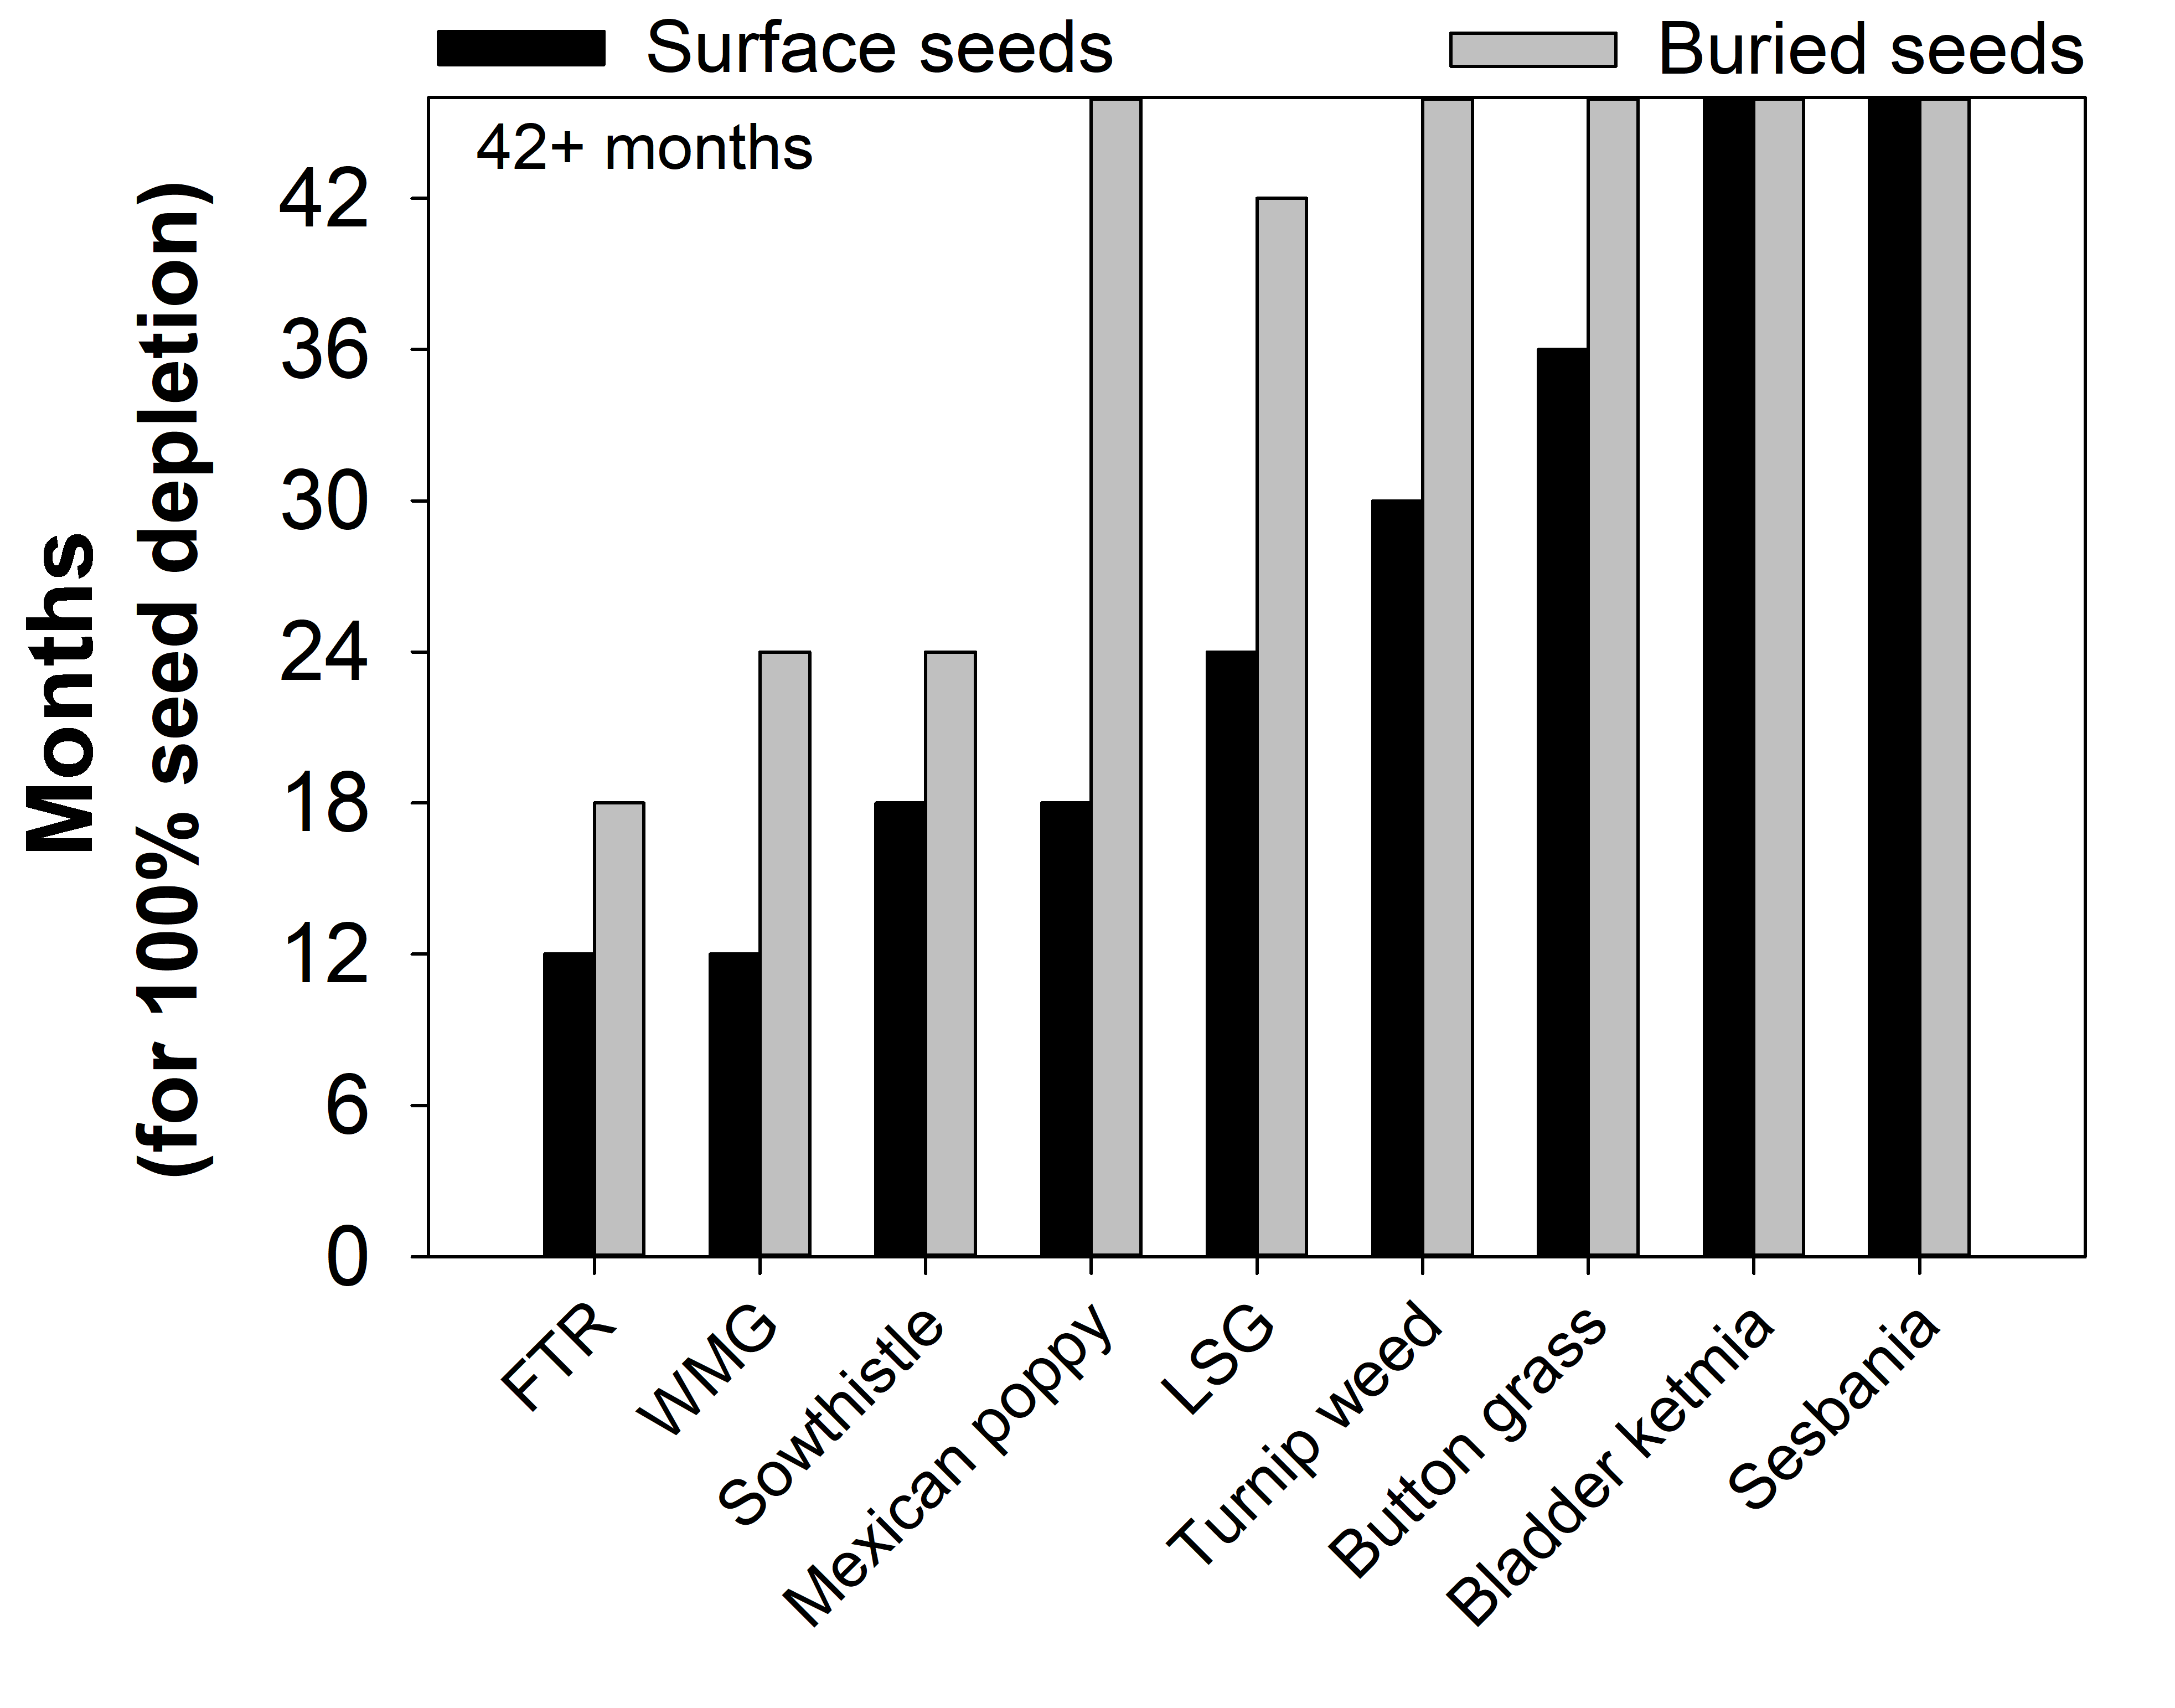 This figure is a column graph showing the number of months required to deplete complete seed banks of different weed species. Seeds were placed on the soil surface or buried at 2 cm soil depth. 42+ means more than 42 months.